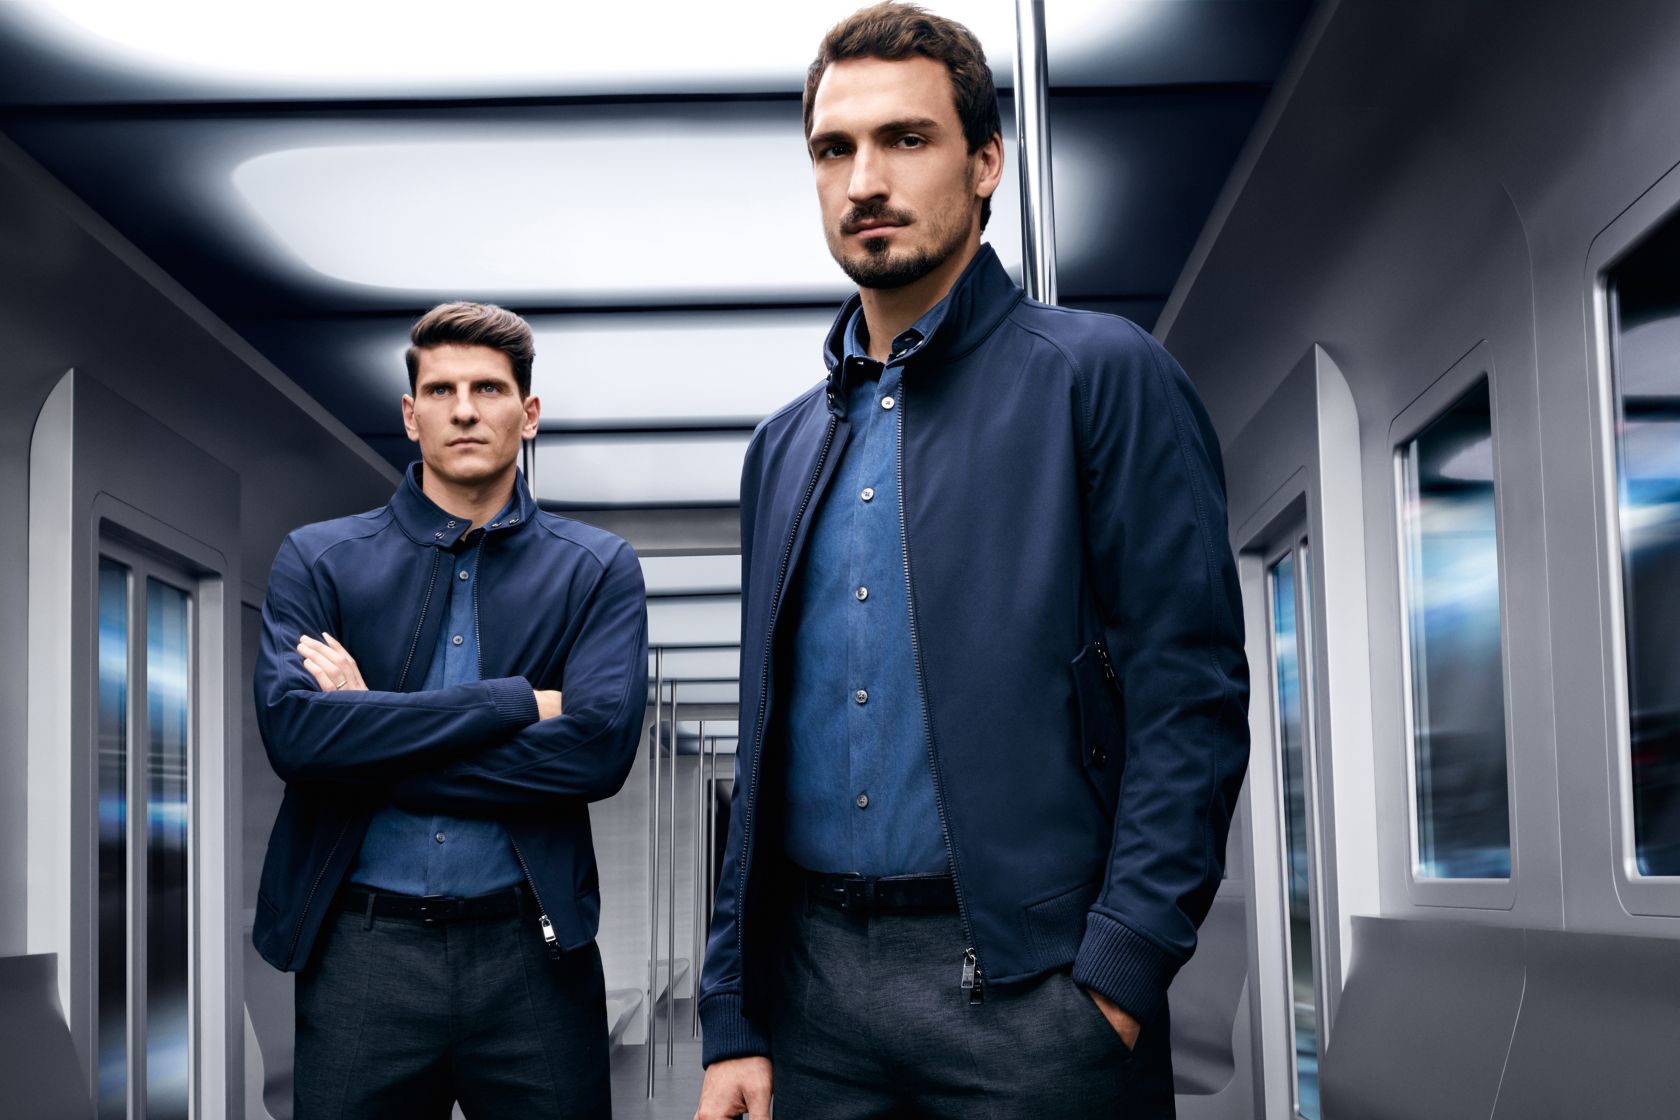 Beskrive Bytte Forstad 10 Questions with Mats Hummels and Mario Gomez